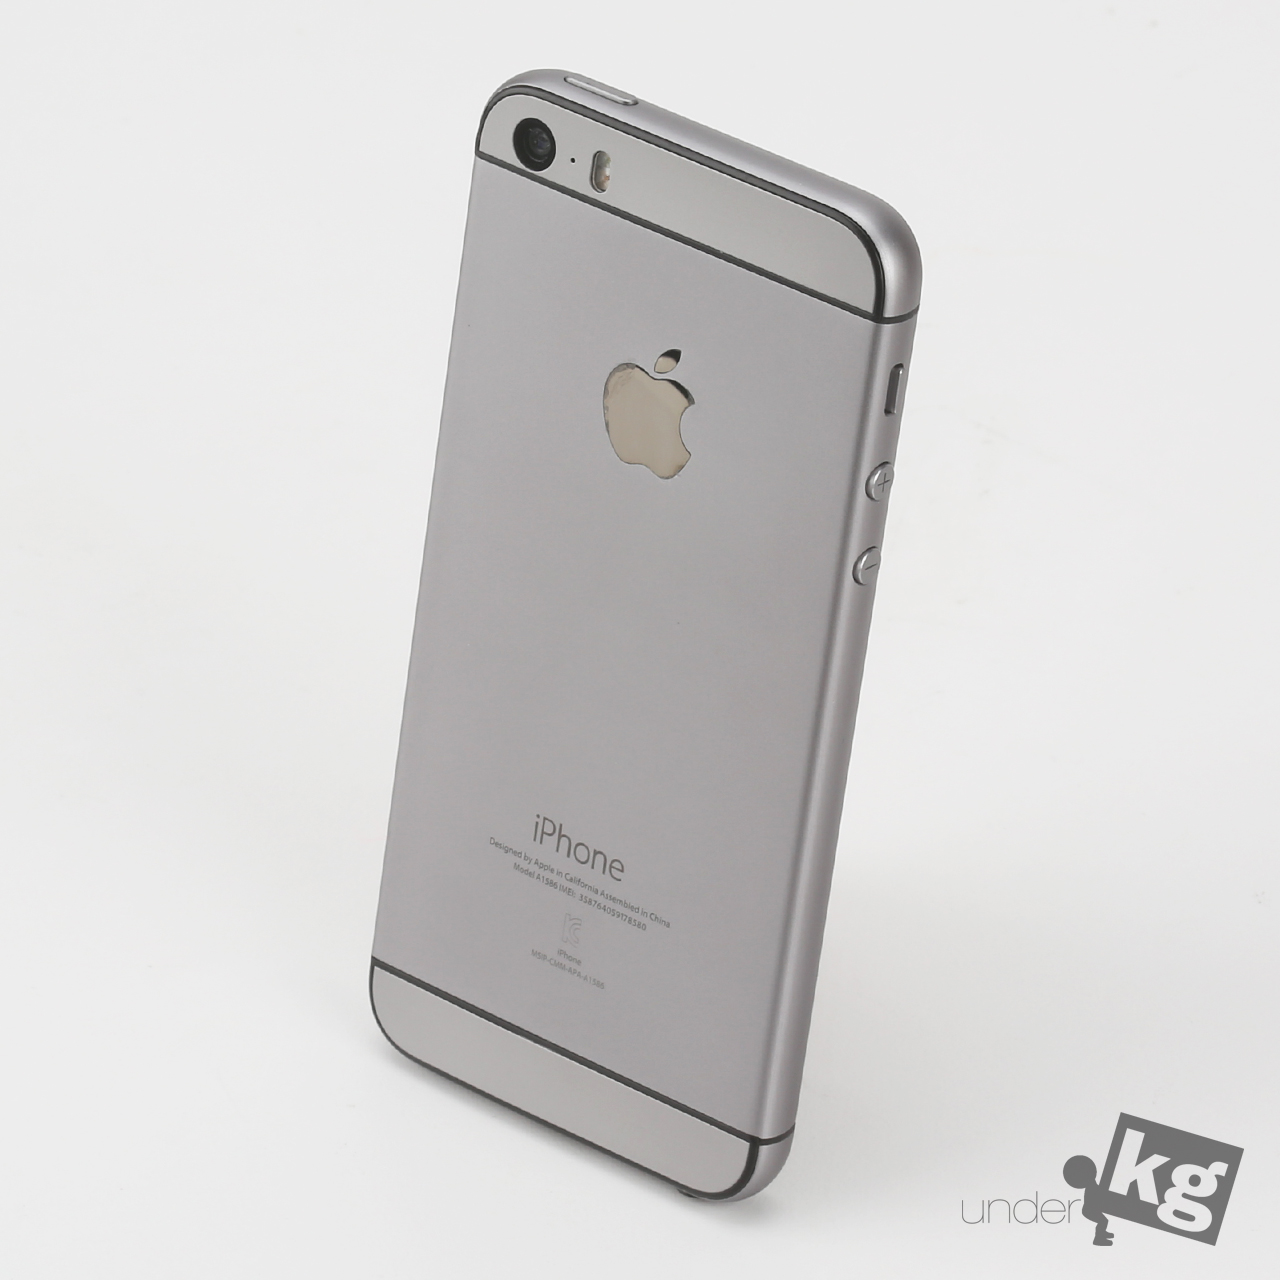 iphone5s-to-iphone6-housing-change-pic2.jpg